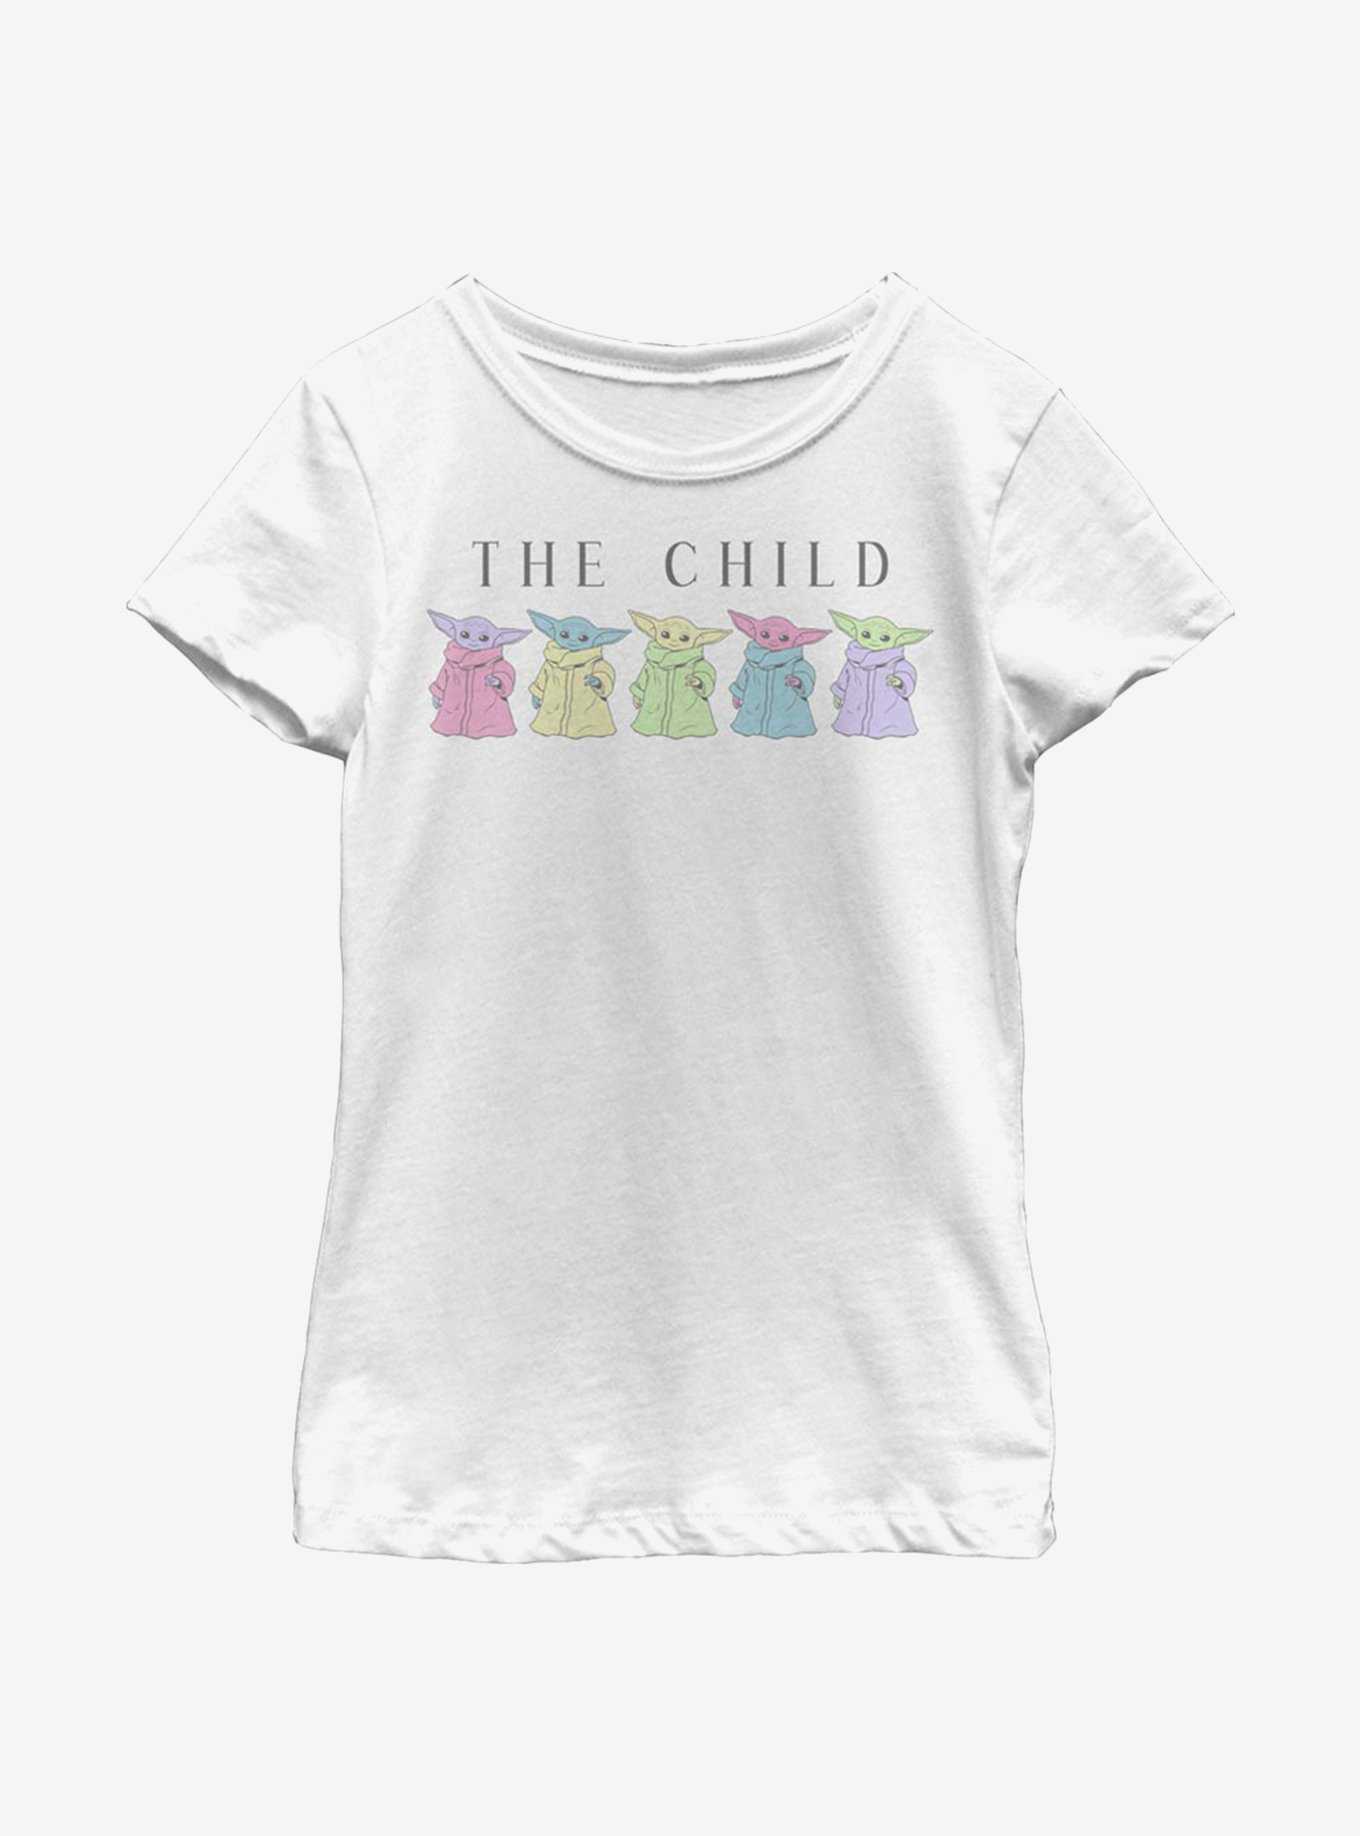 Star Wars The Mandalorian The Child Colors Youth Girls T-Shirt, , hi-res